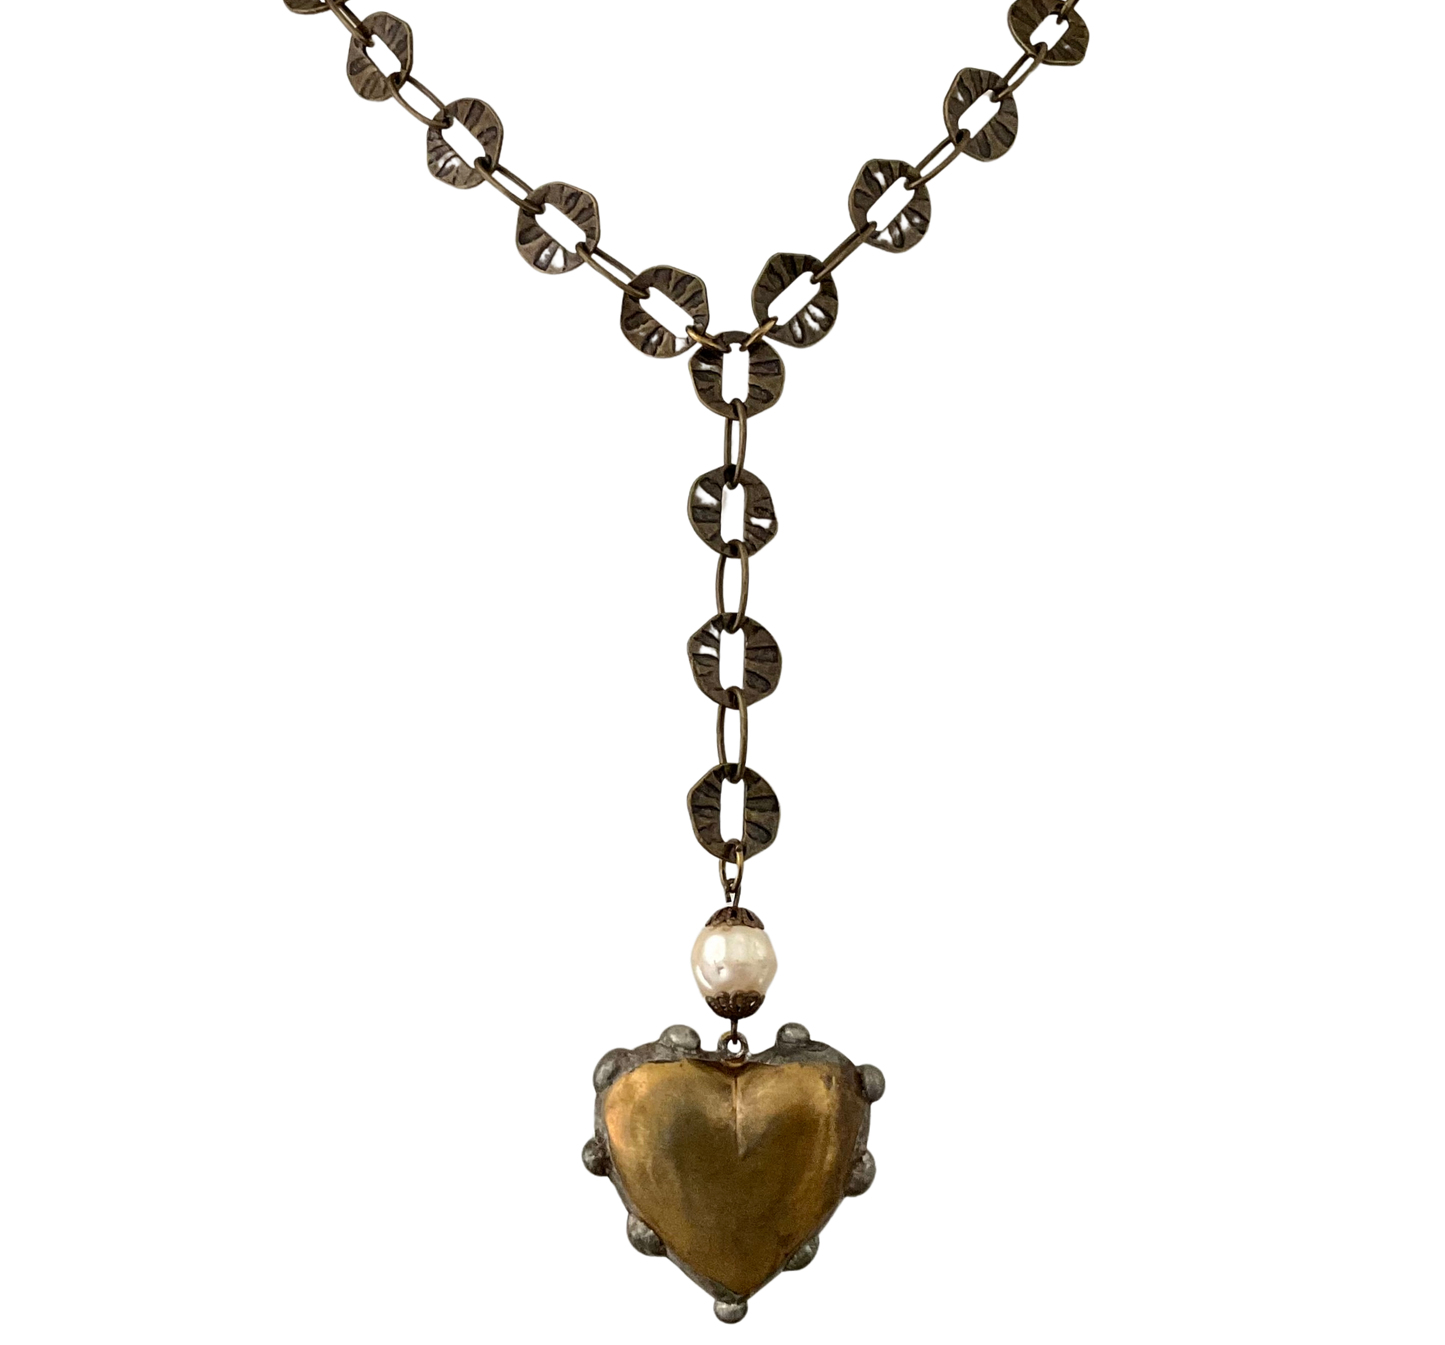 Vintage Chain with Pearl Connector & Soldered Heart 24"